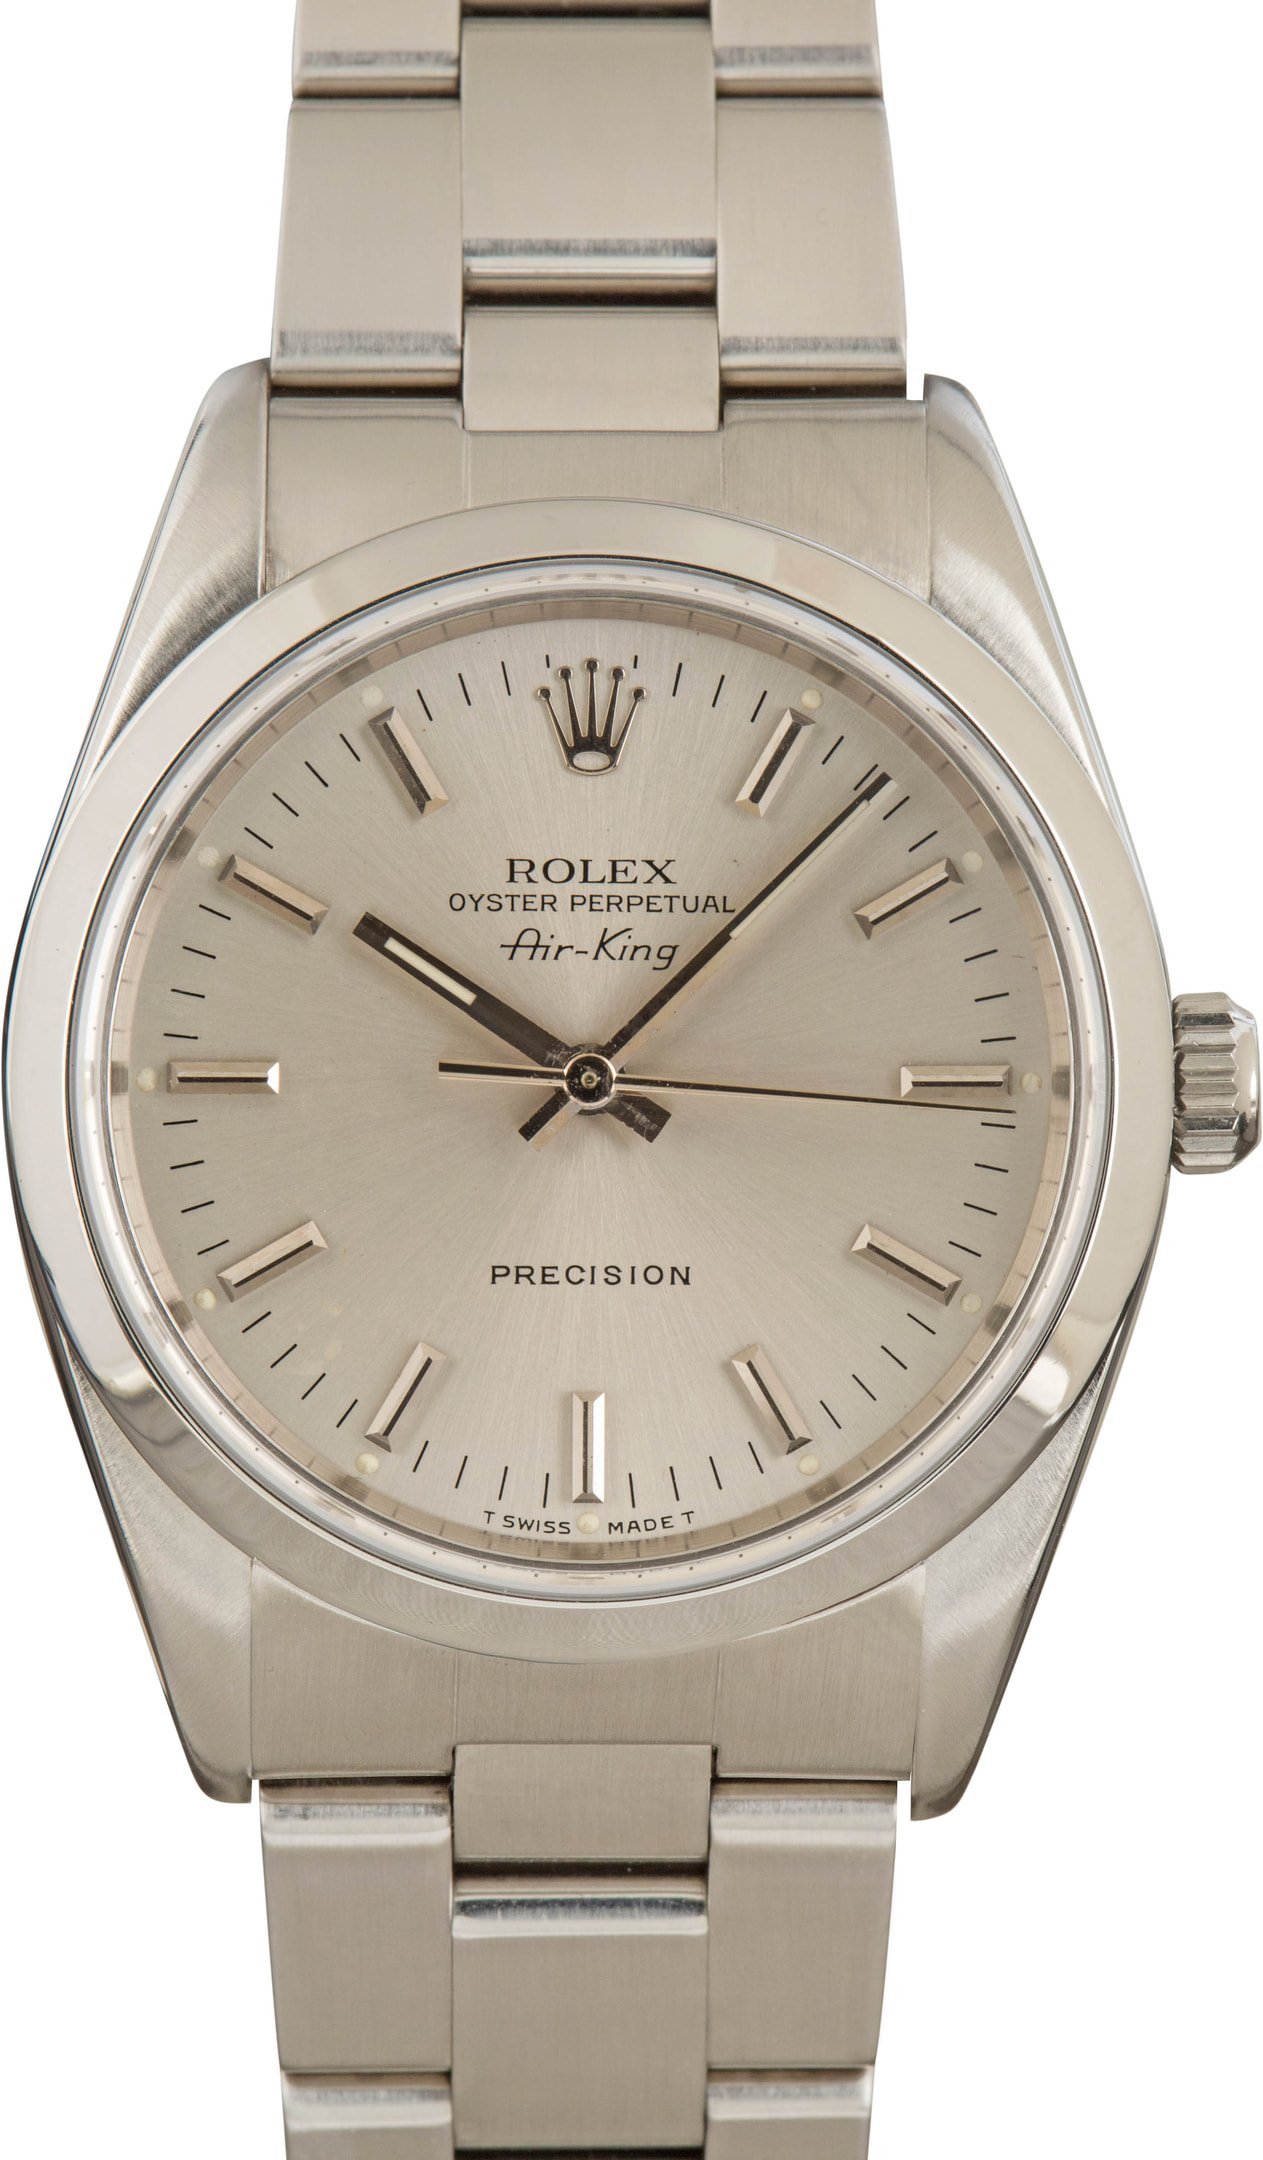 Buy Used Rolex Air-King 14000 | Bob's Watches - Sku: 162576